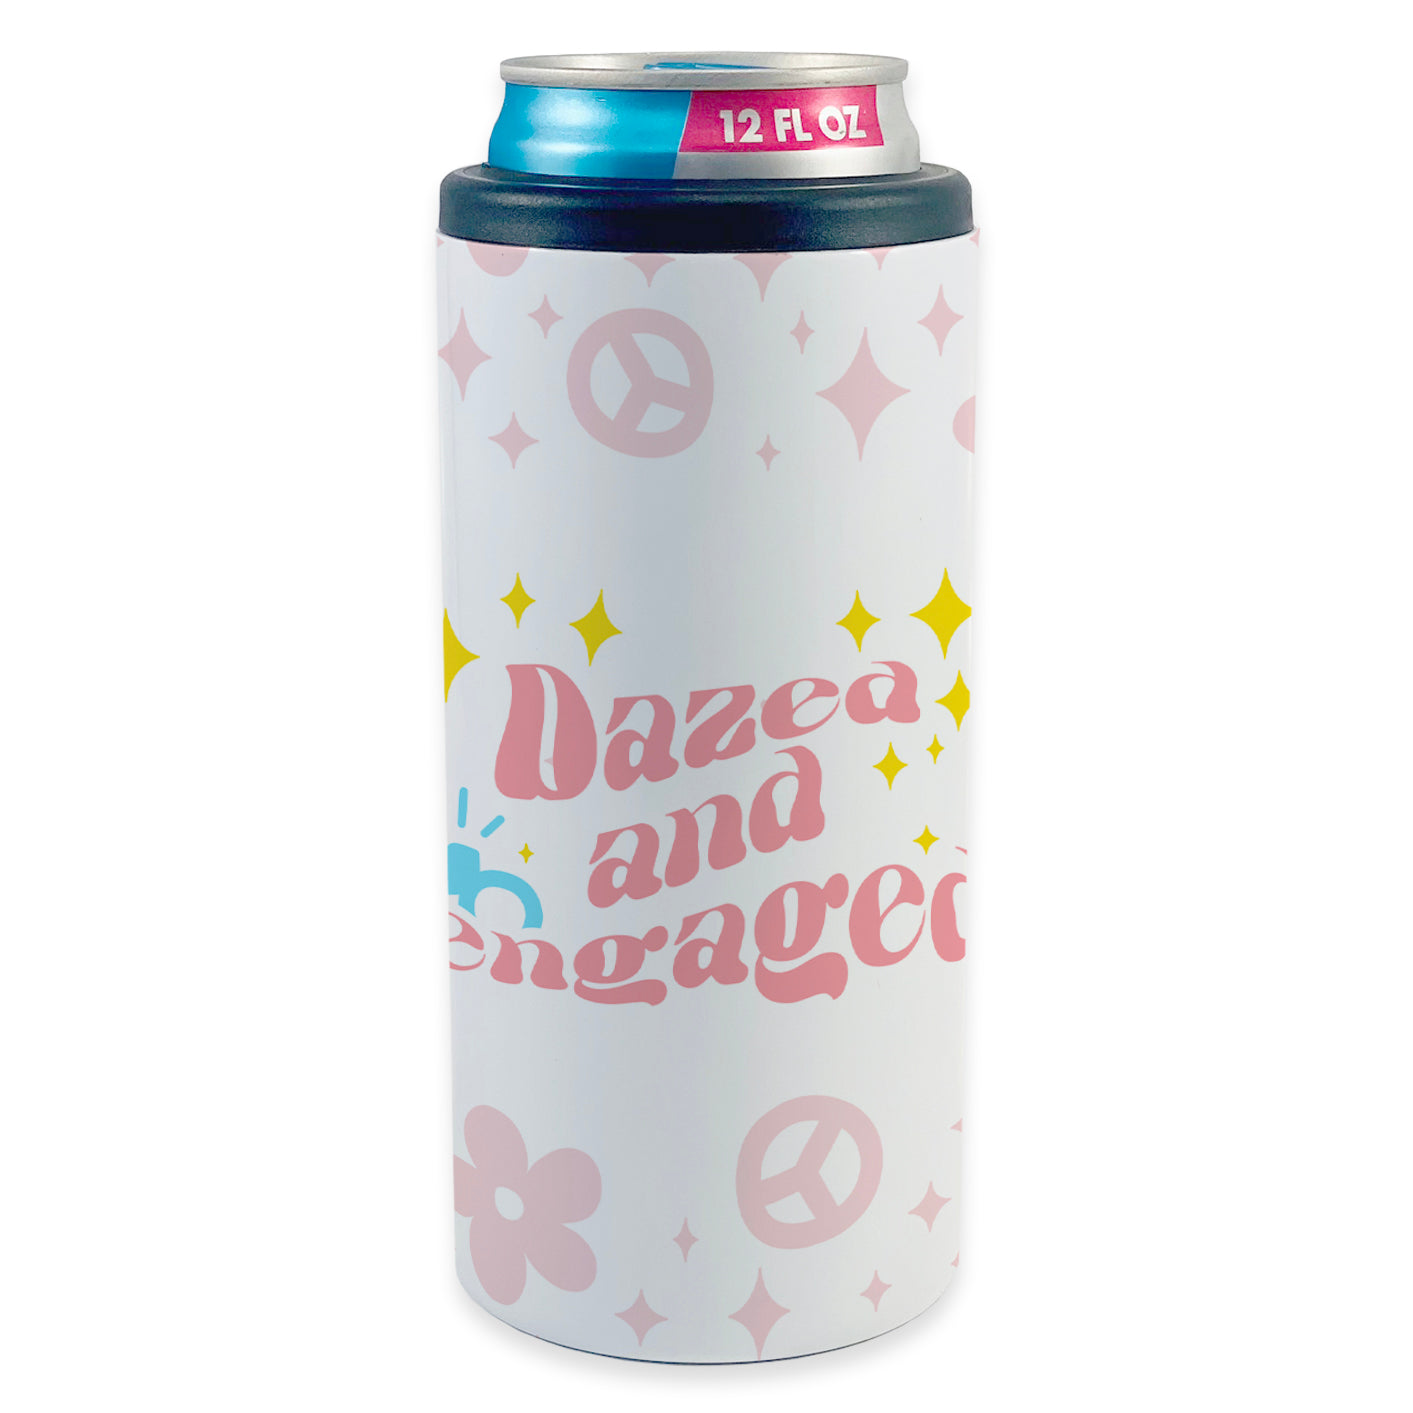 Bridal Party Collection (Dazed and Engaged) 12 oz Stainless Steel Slim Can Cooler SSKOOW0008